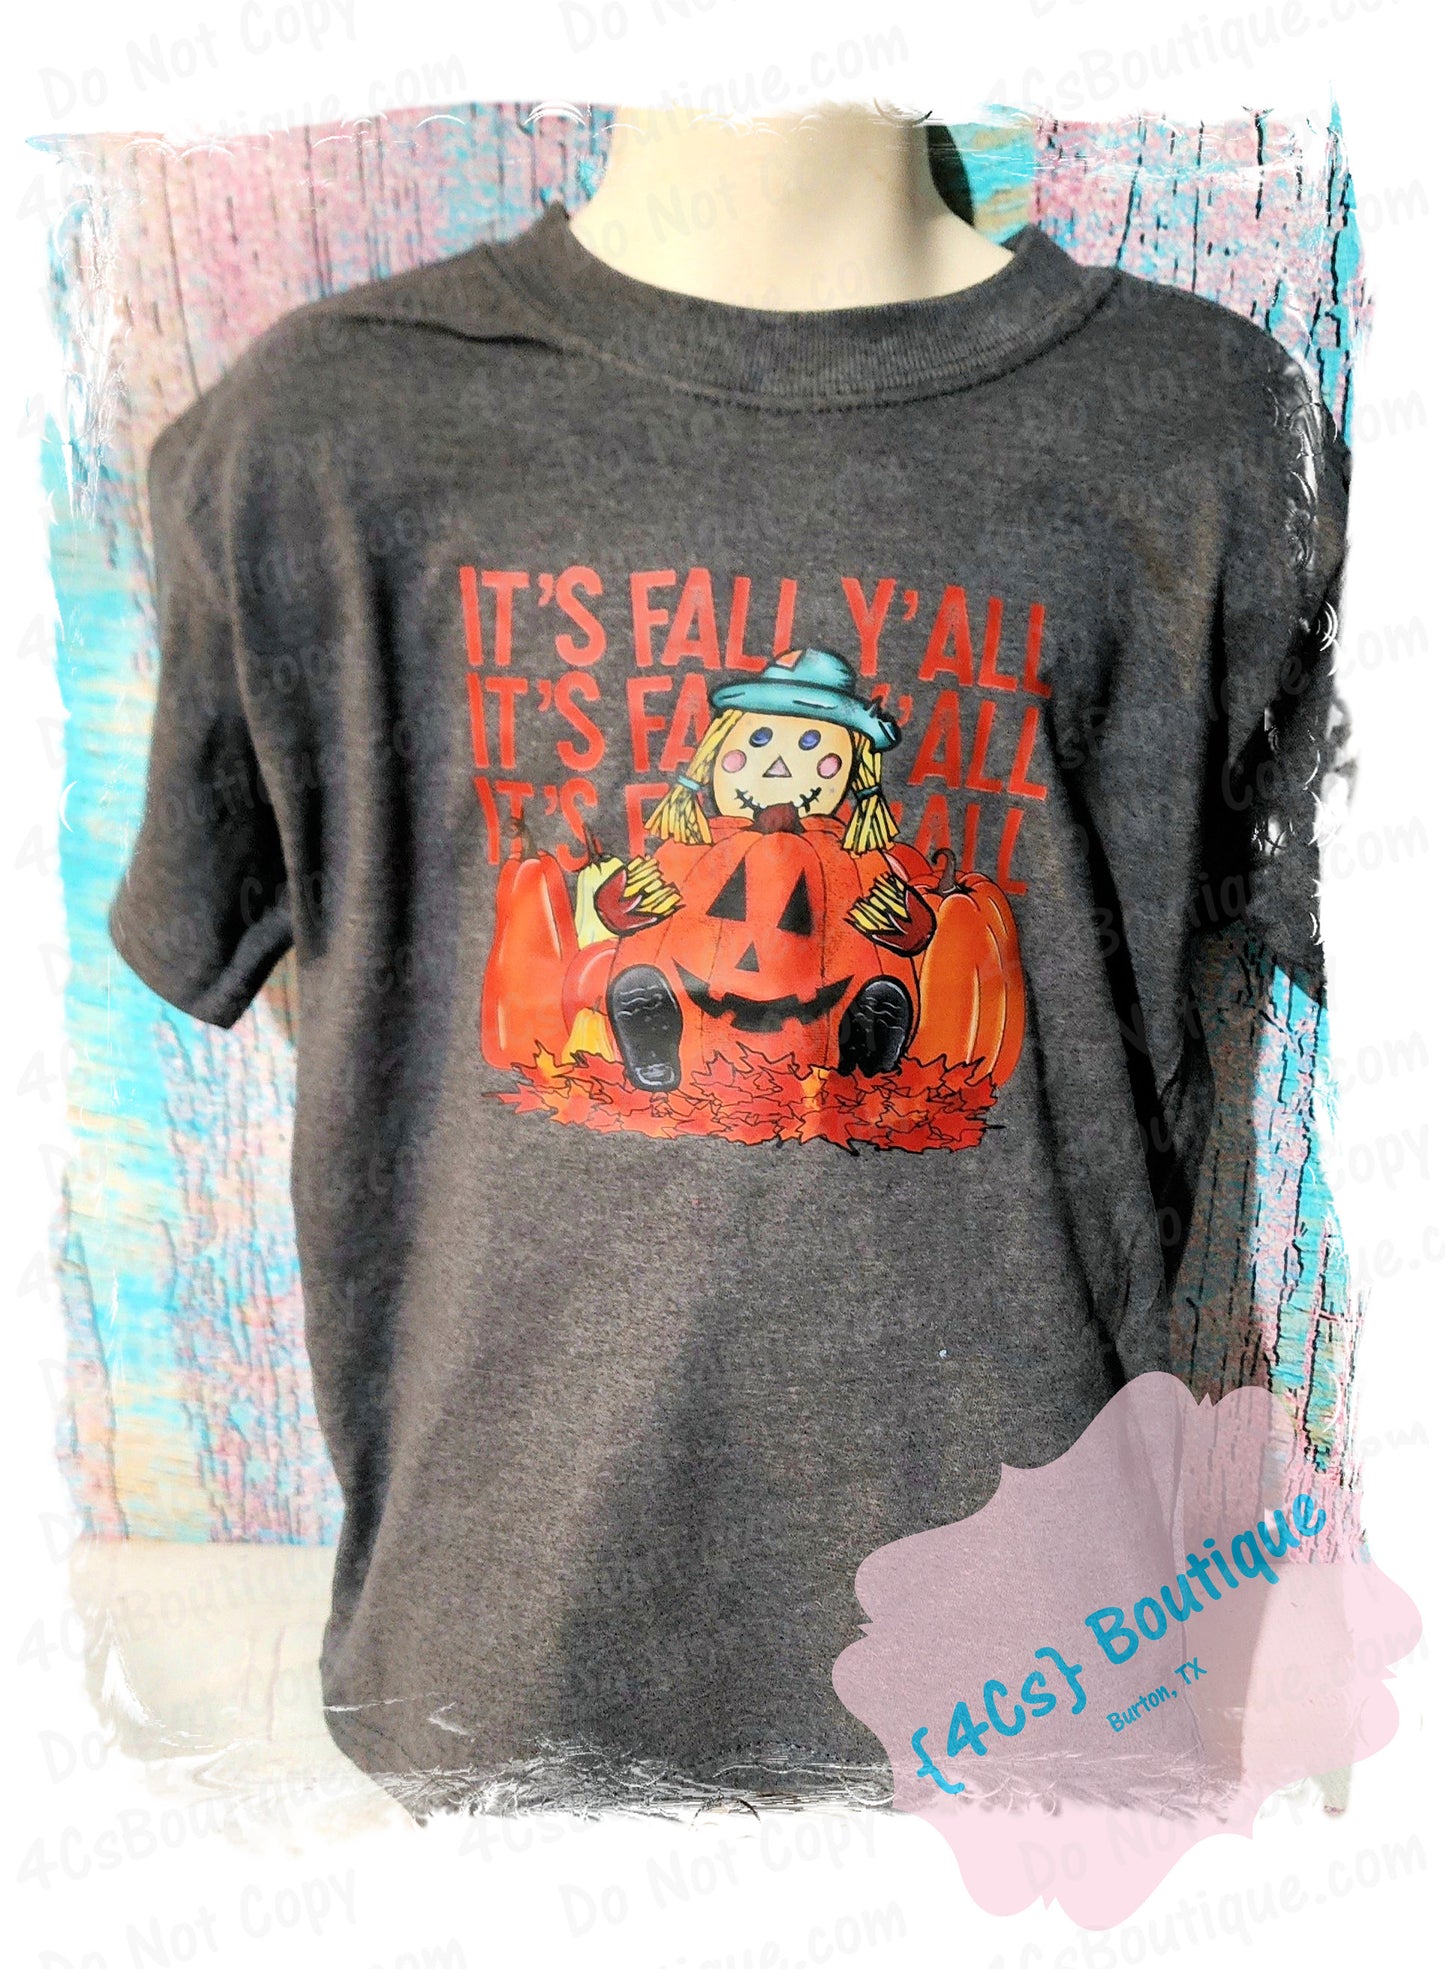 It's Fall Y'all Youth Size XS (2-4) RTS Shirt Dark Heather Gray